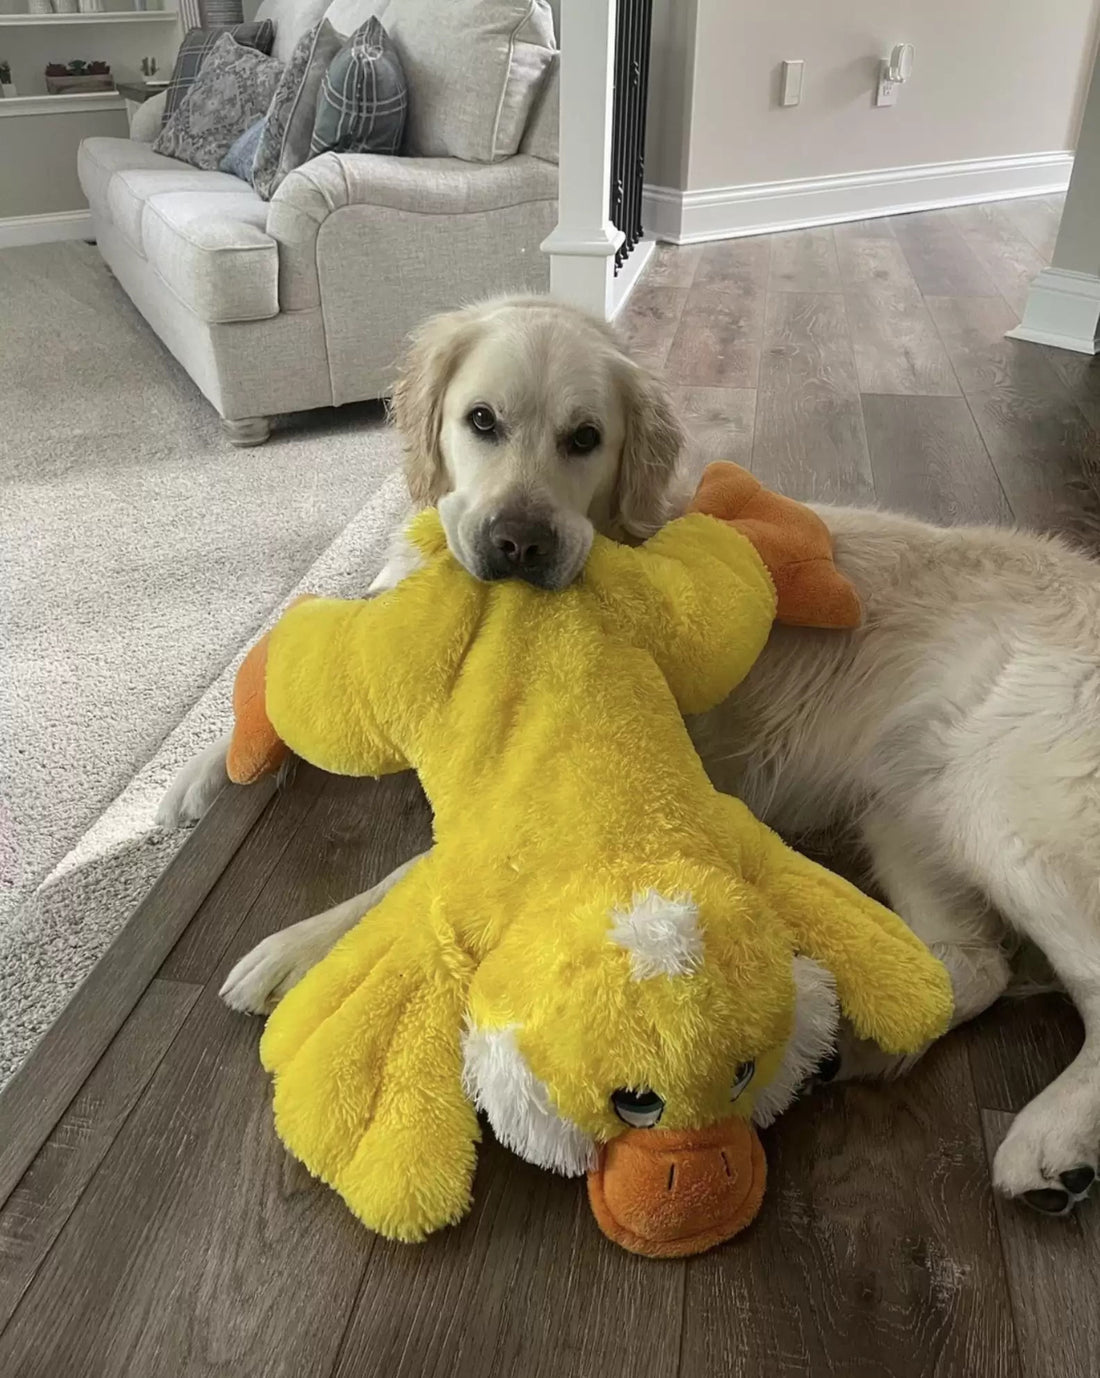 Dog Gets Surprise Of His Life As Parent Dresses Up As His Favorite Toy!